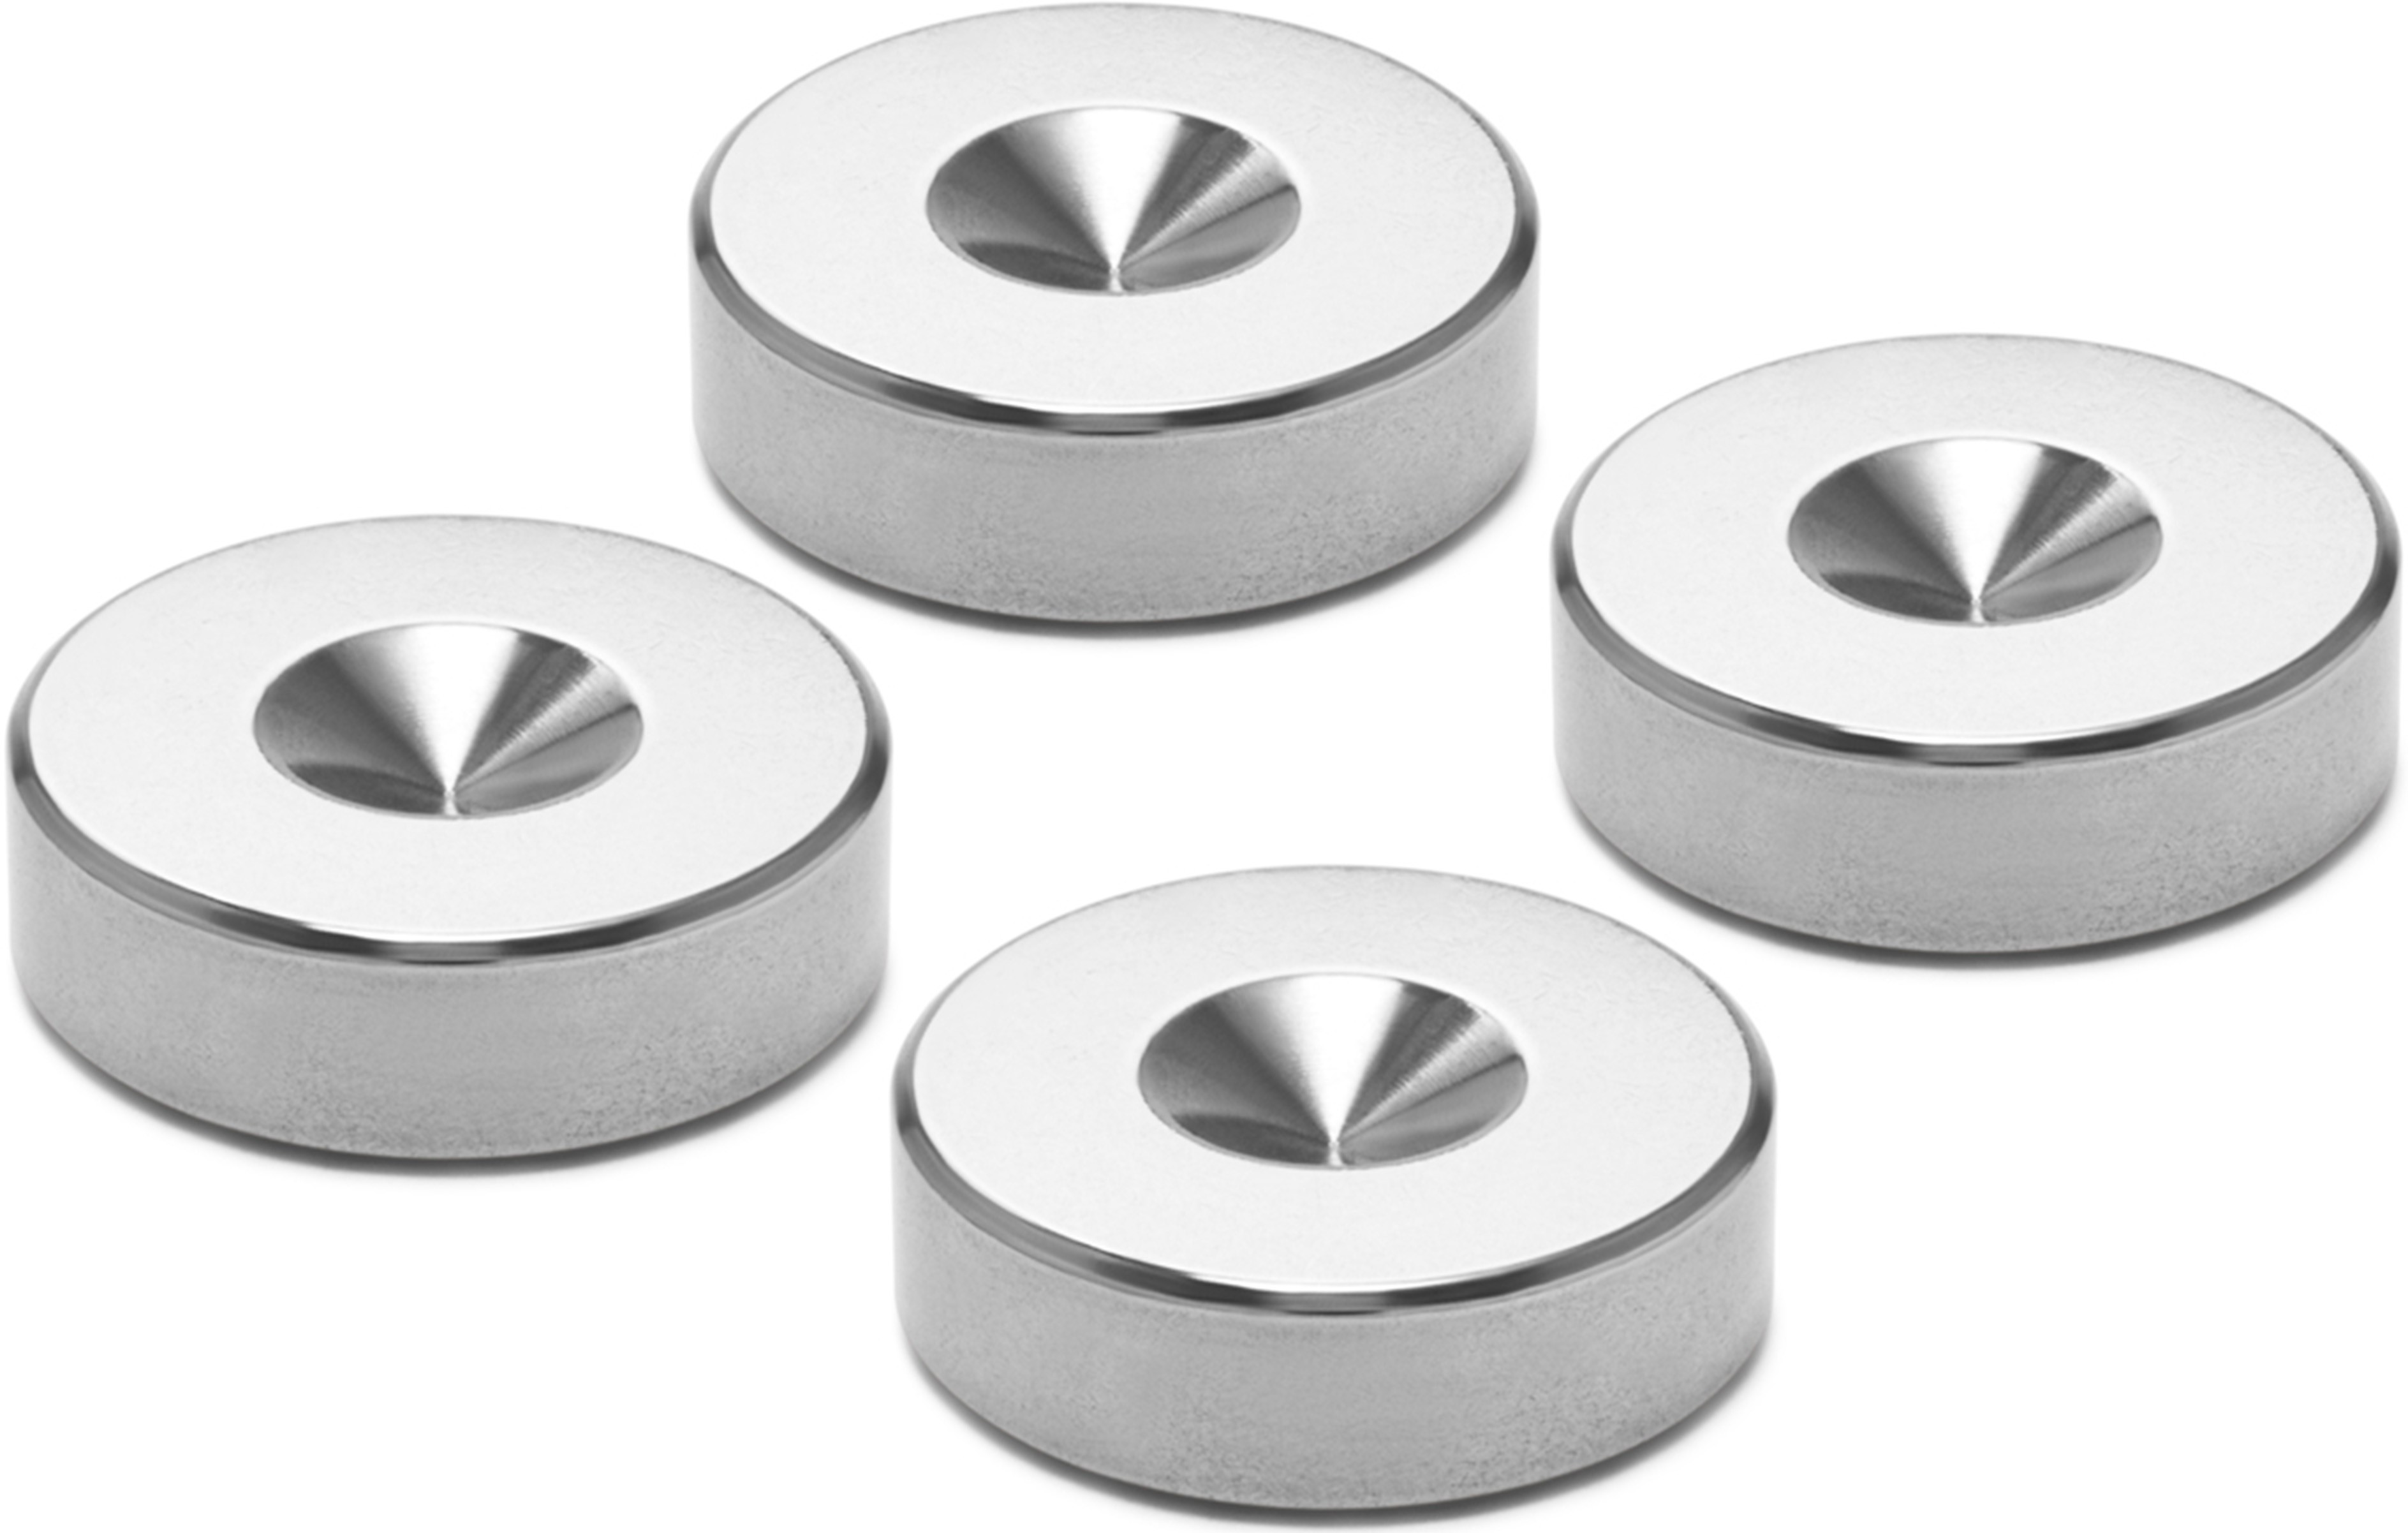 OYAIDE INS-SP Spike Pads Stainless Steel Ø20mm (Set x4)